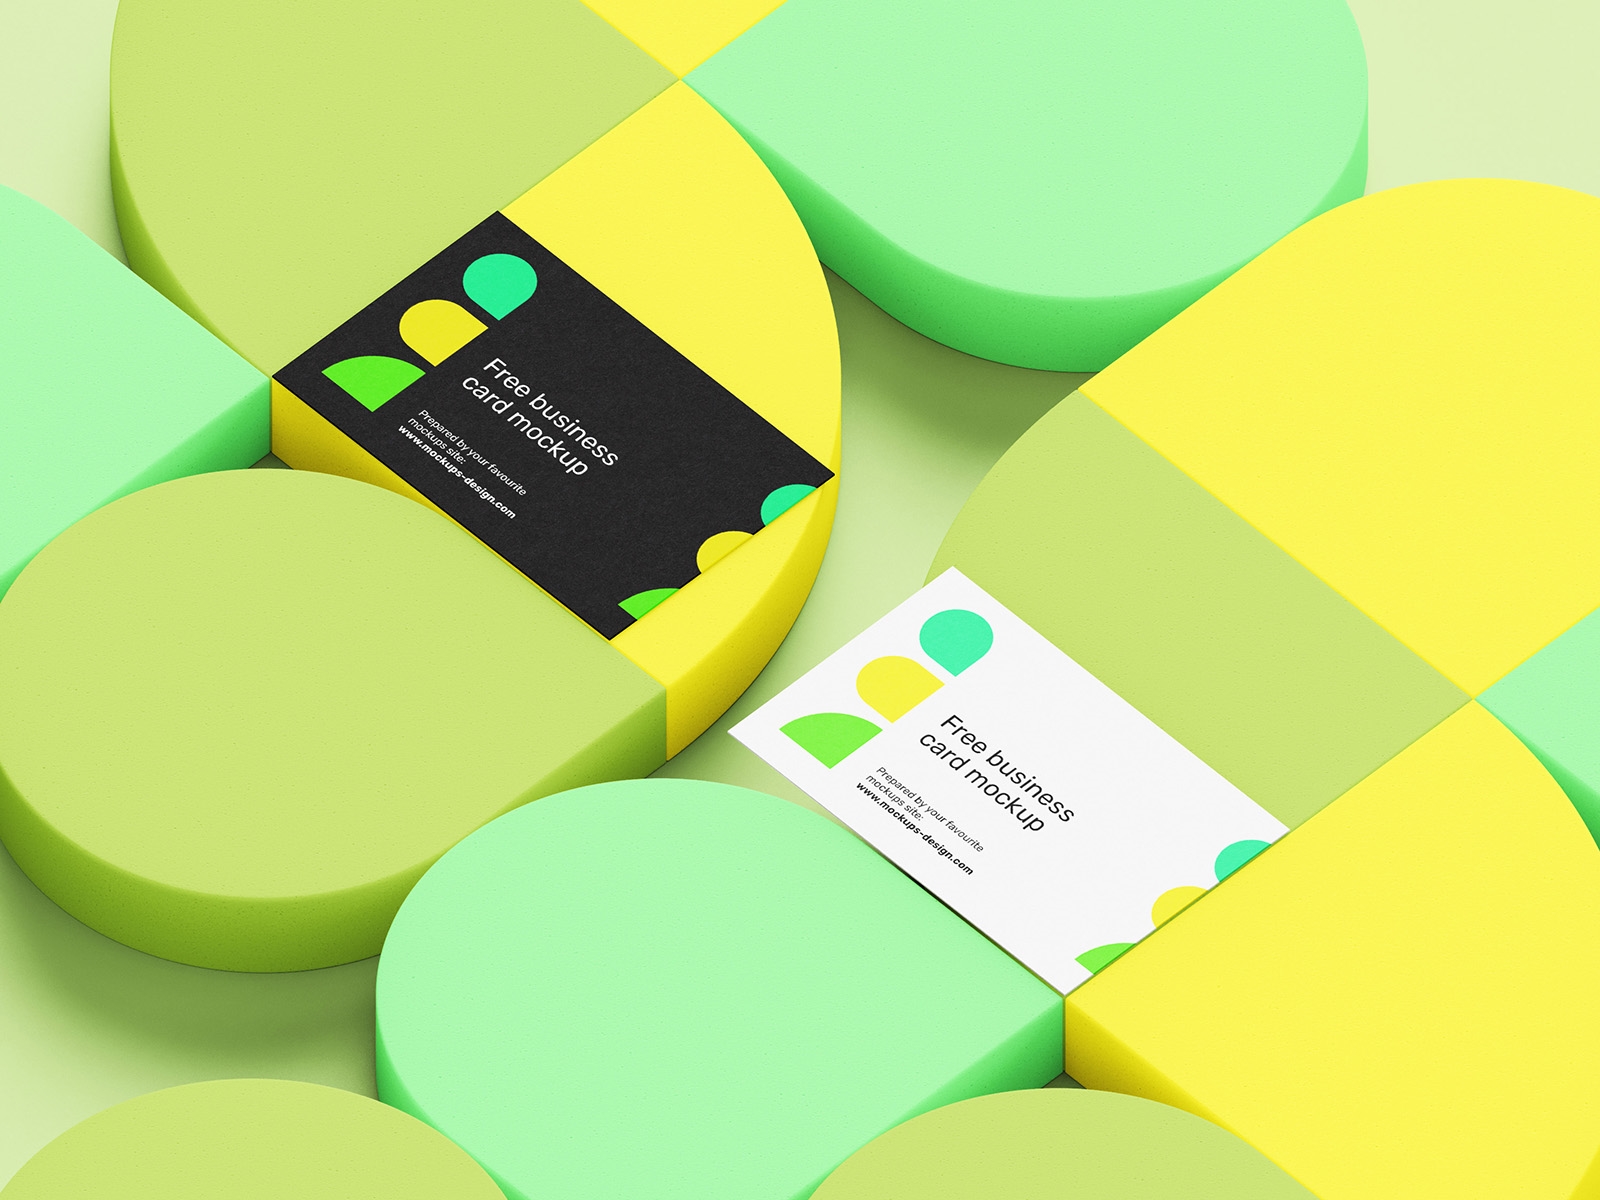 Top and Perspective View of 5 Business Card Mockups on Geometric Background FREE PSD